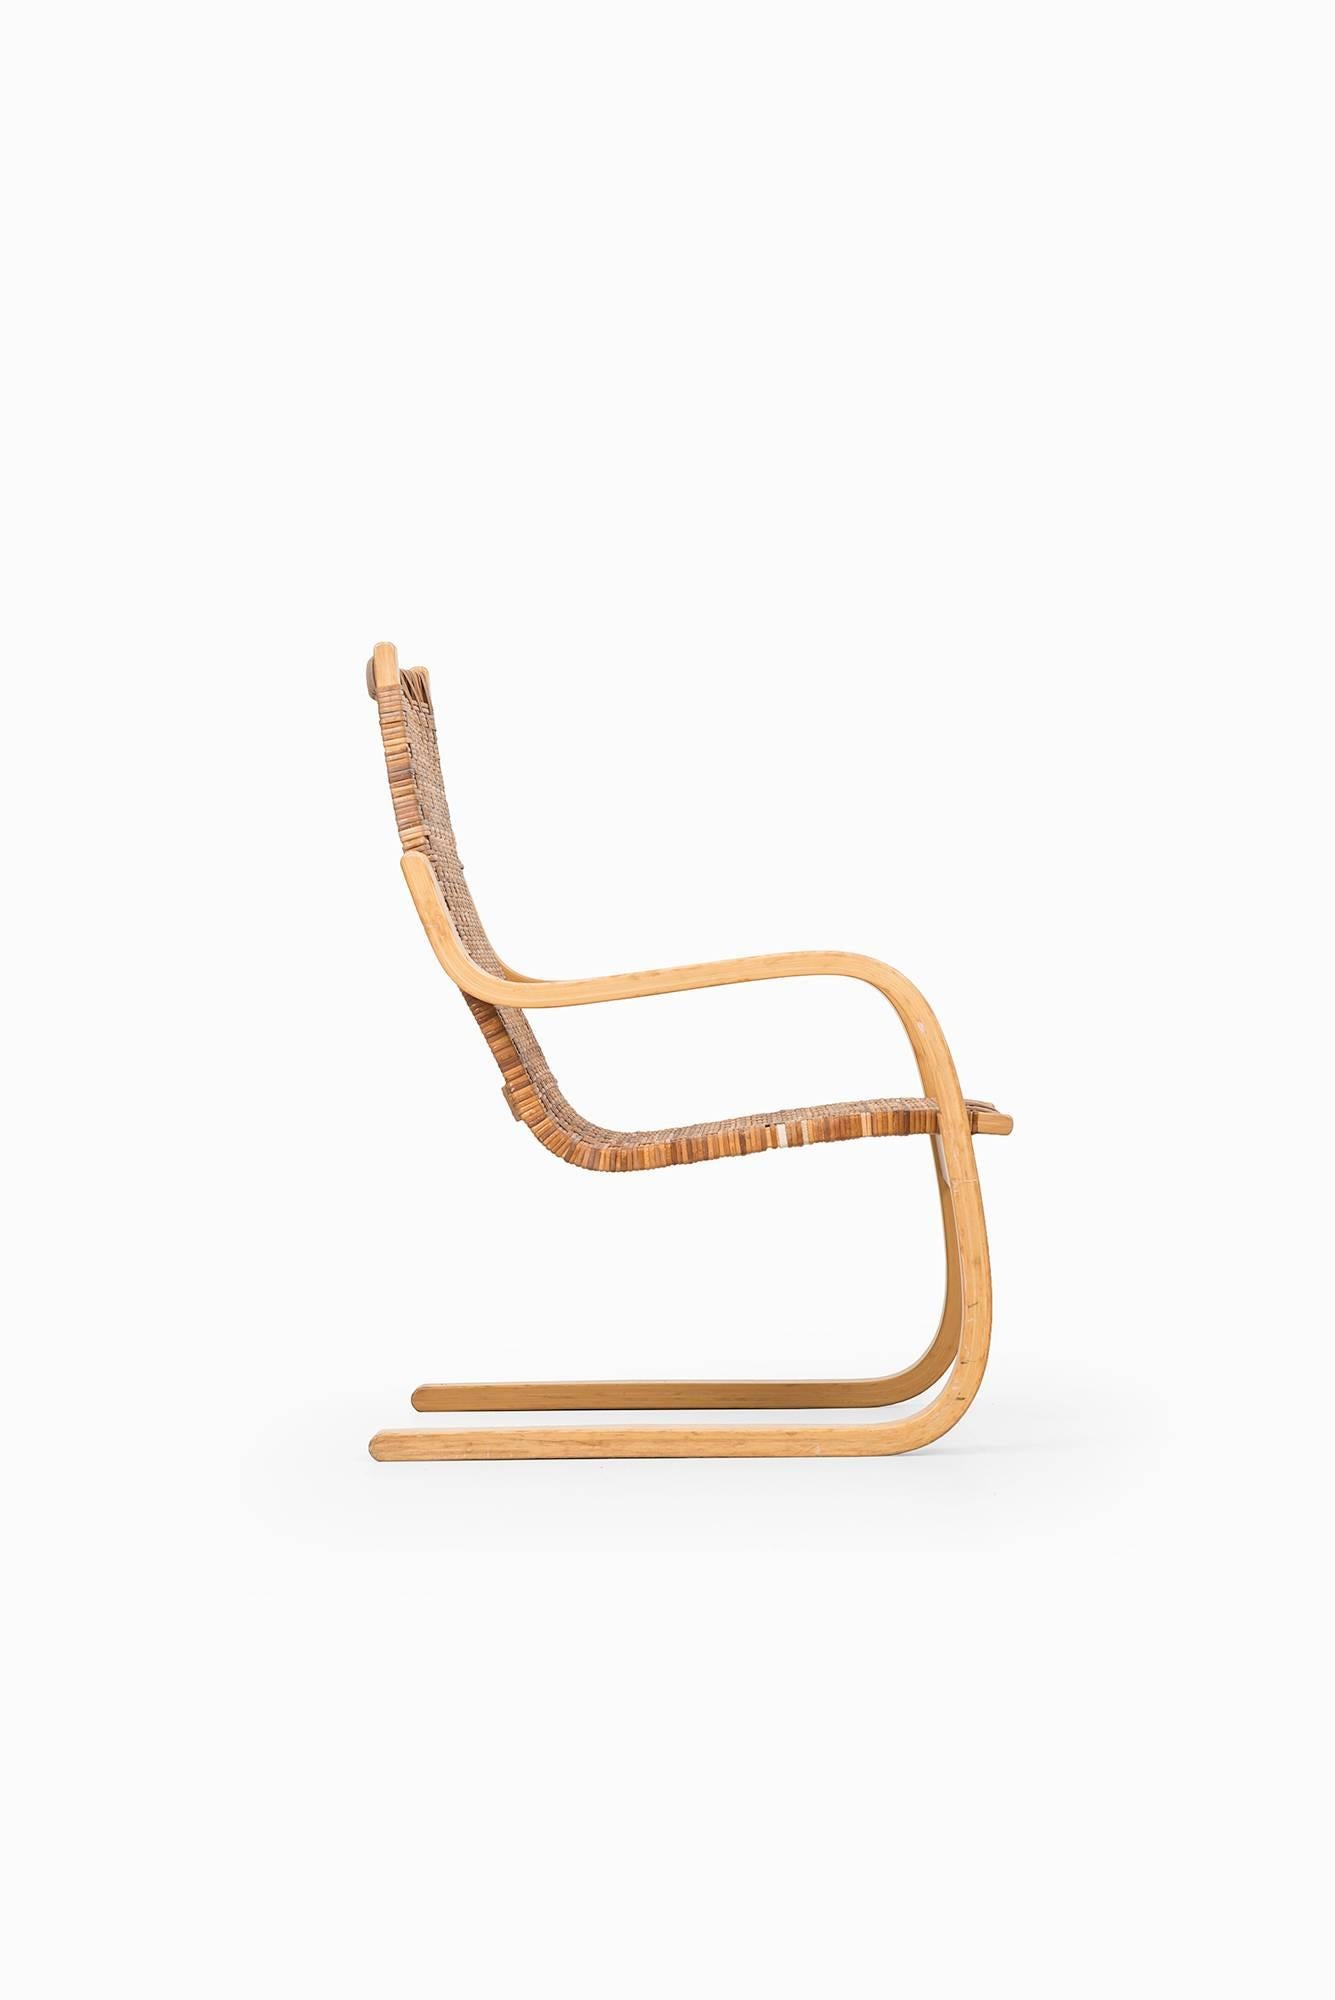 Cantilevered easy chair model 406 designed by Alvar Aalto. Produced by Artek in Finland.